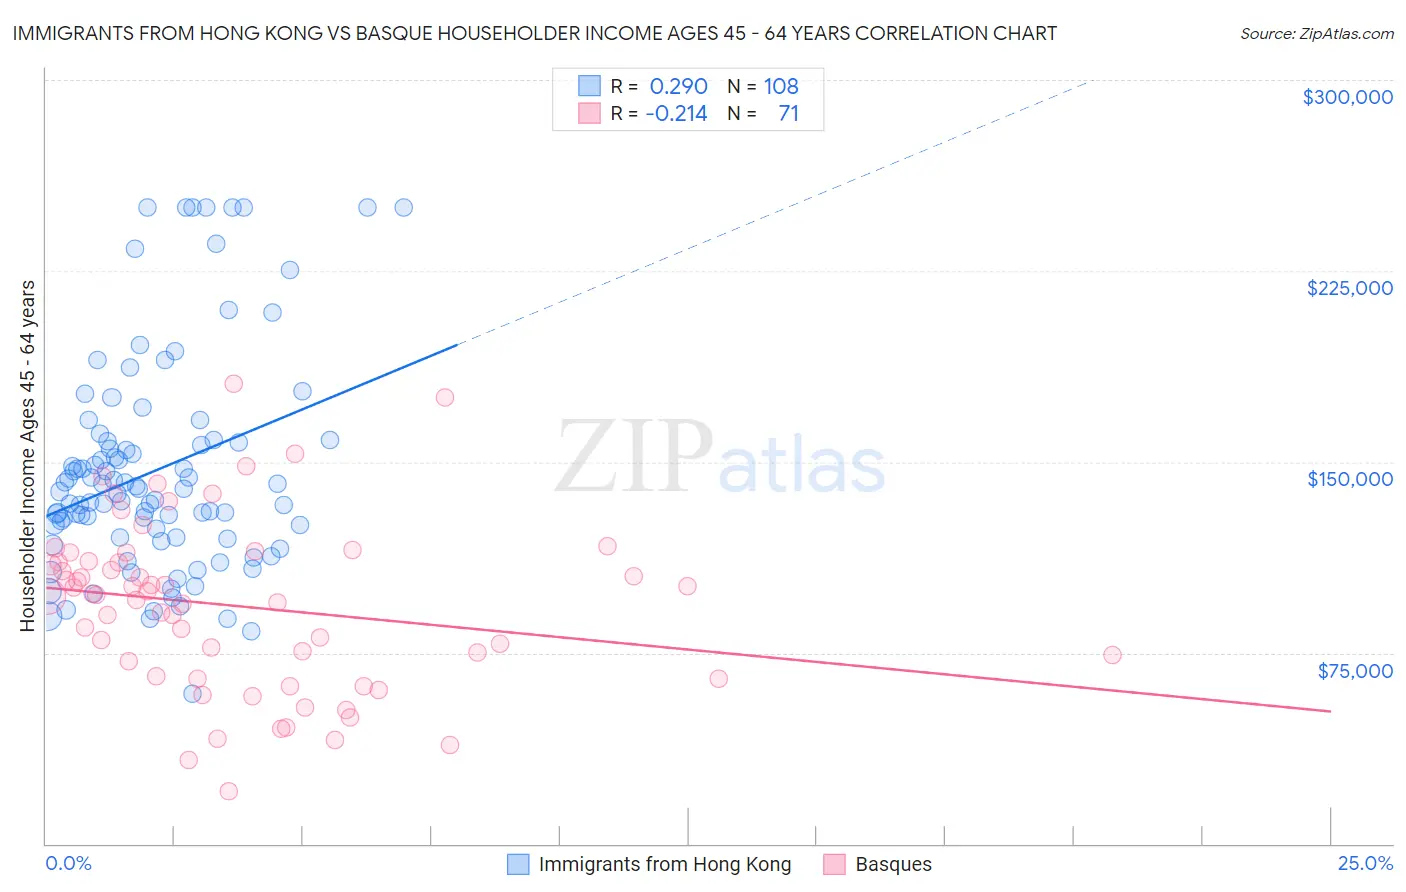 Immigrants from Hong Kong vs Basque Householder Income Ages 45 - 64 years